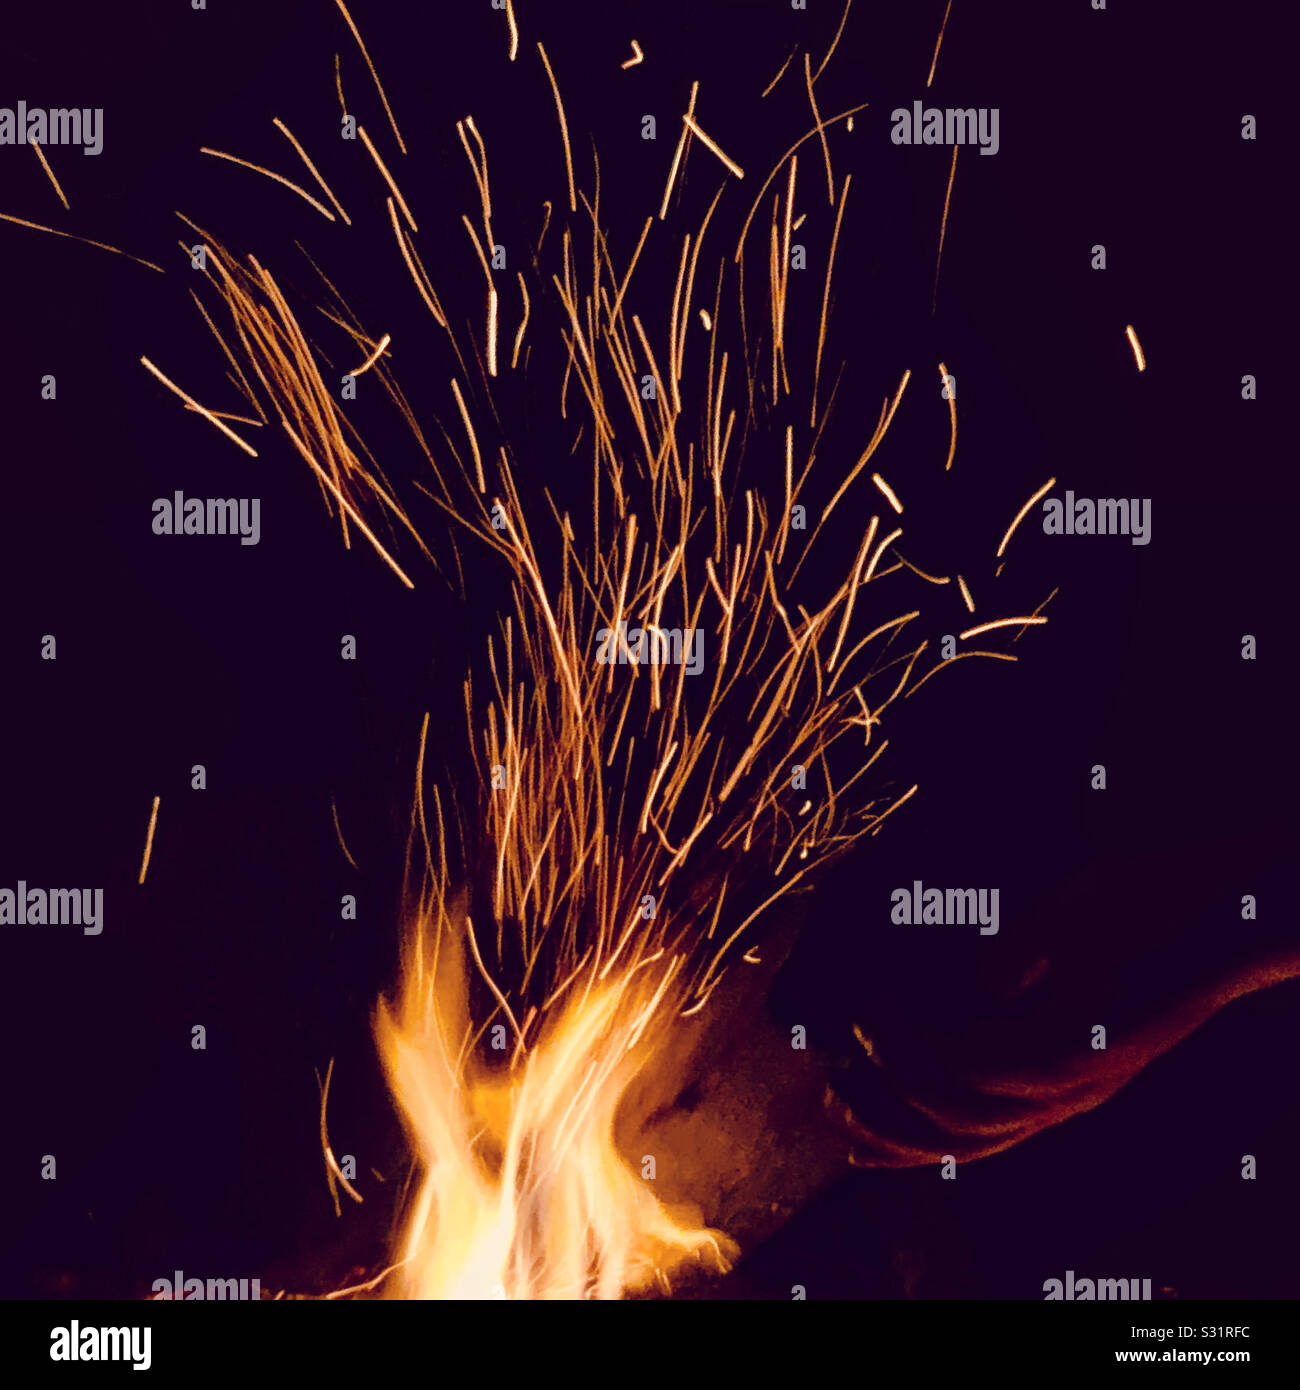 Sparkling fire at night. Stock Photo